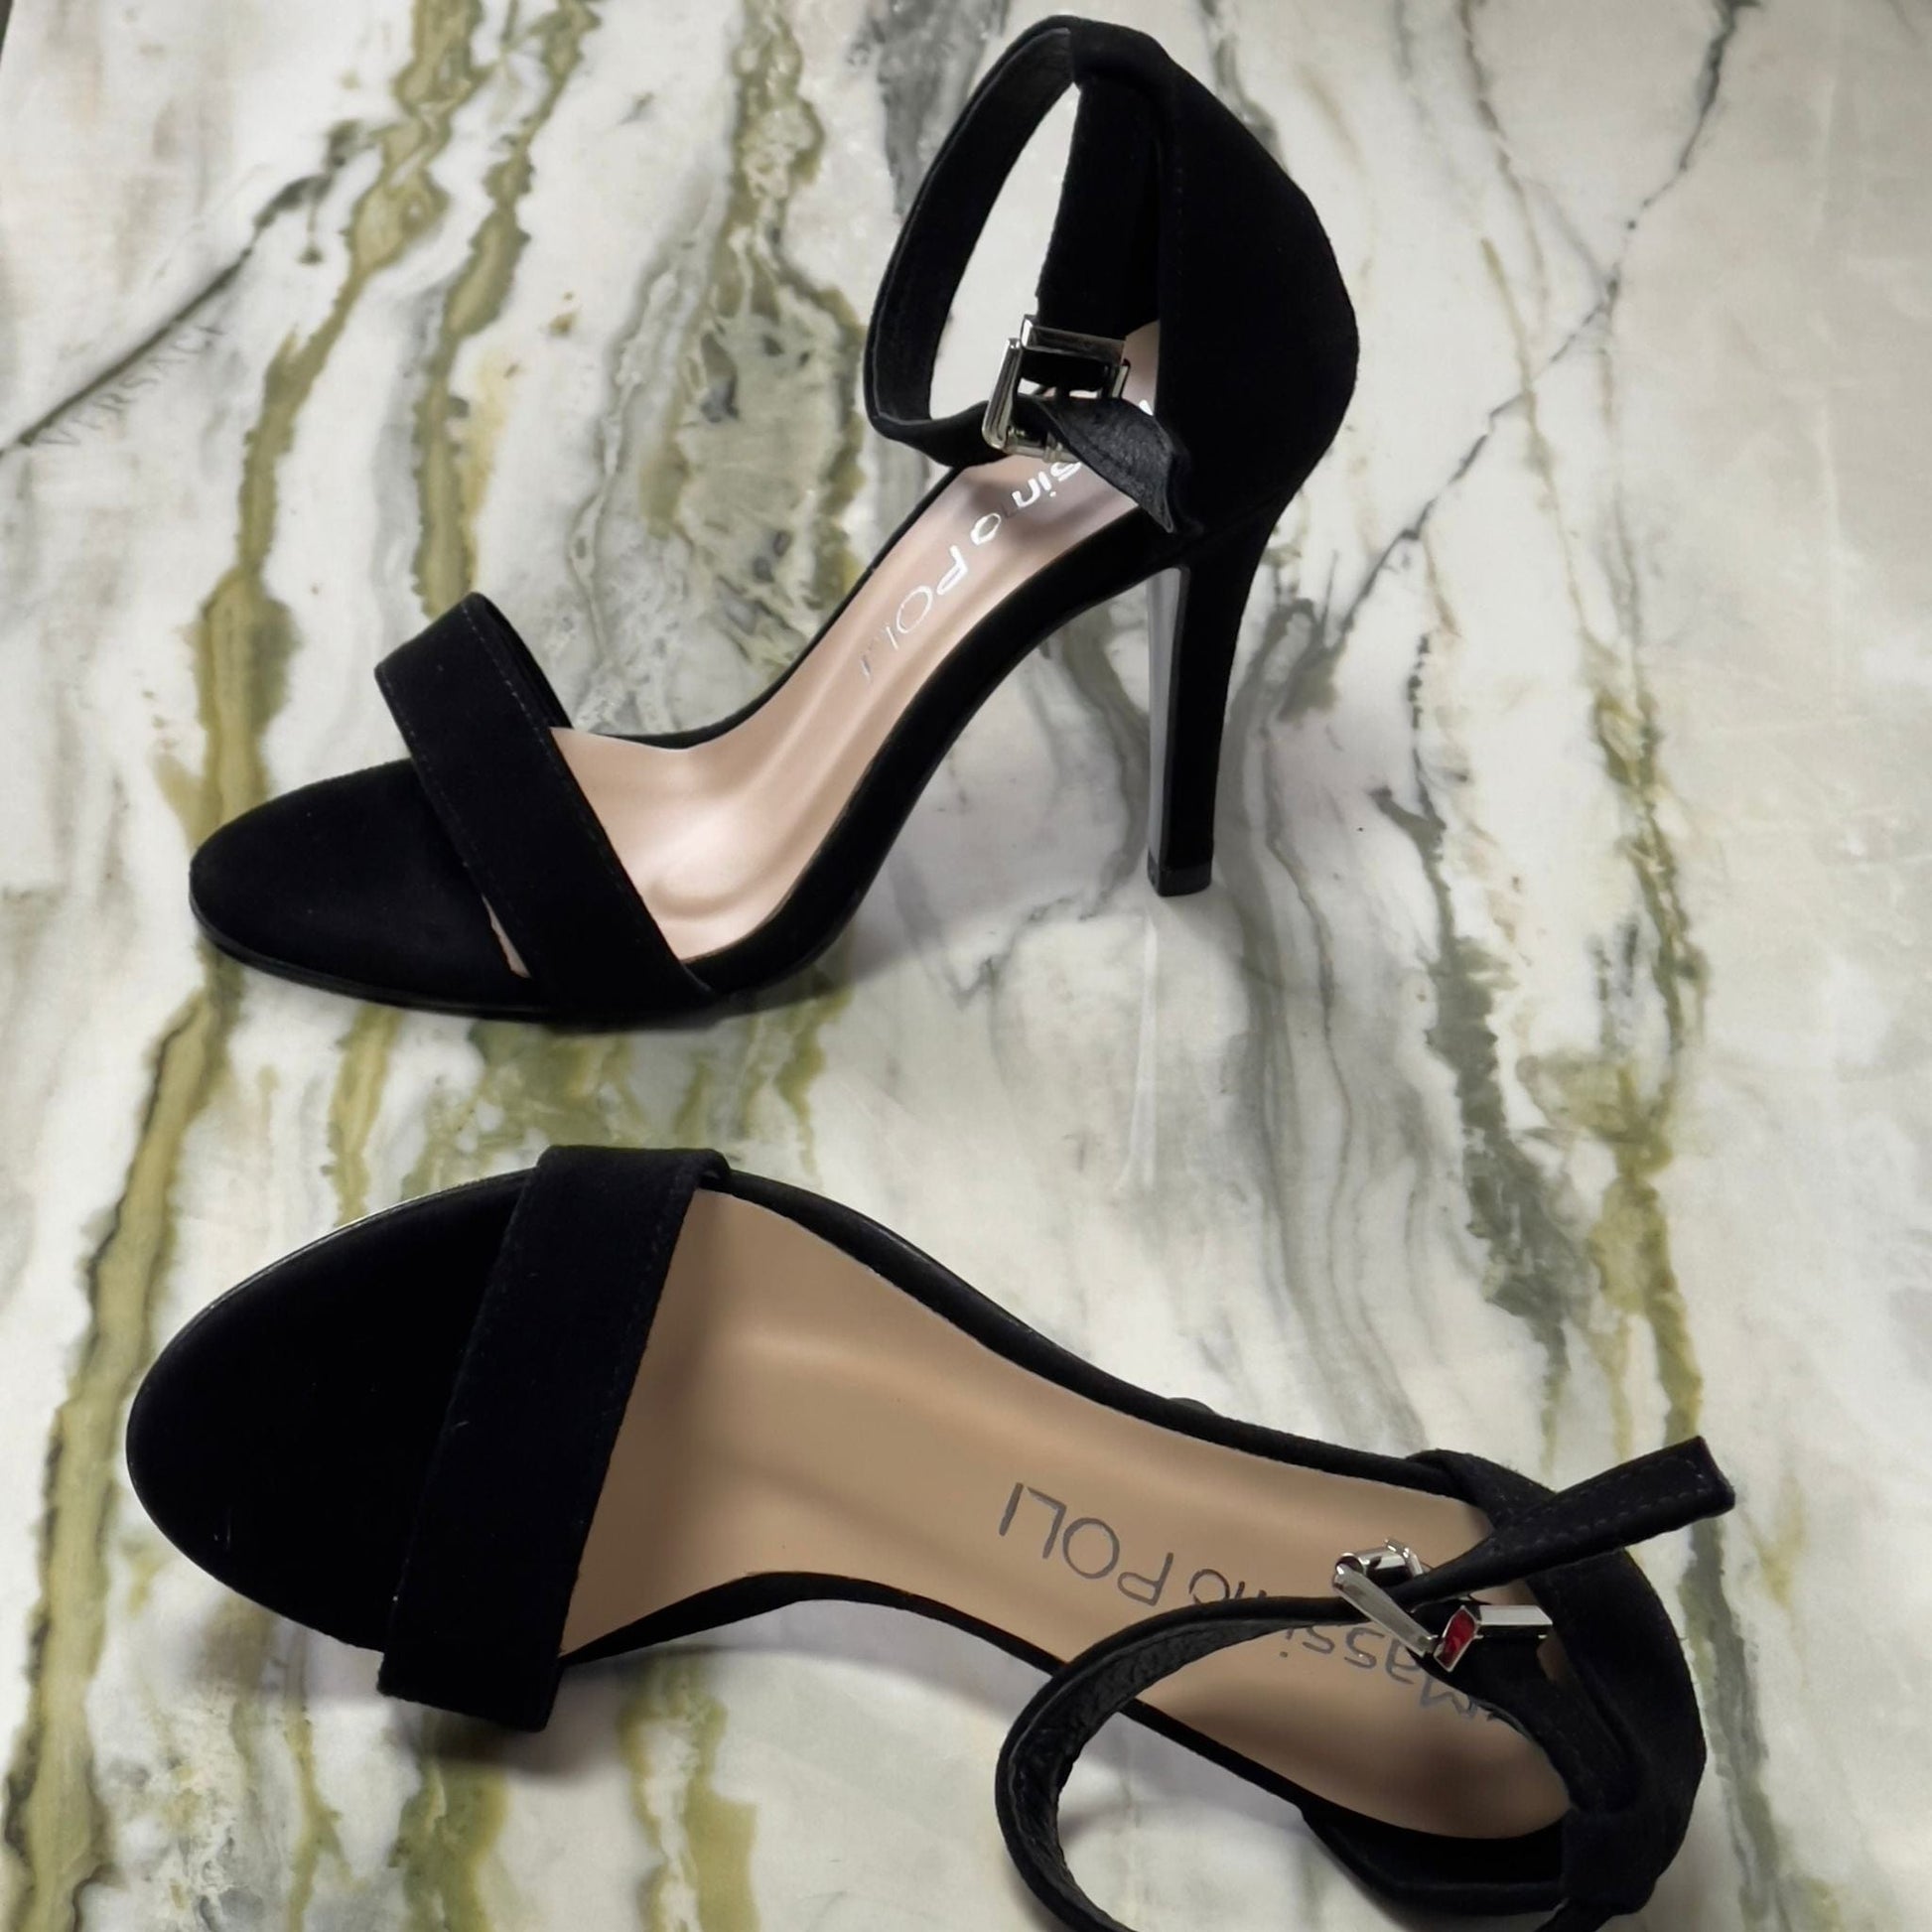 Petite size strap sandals in black suede